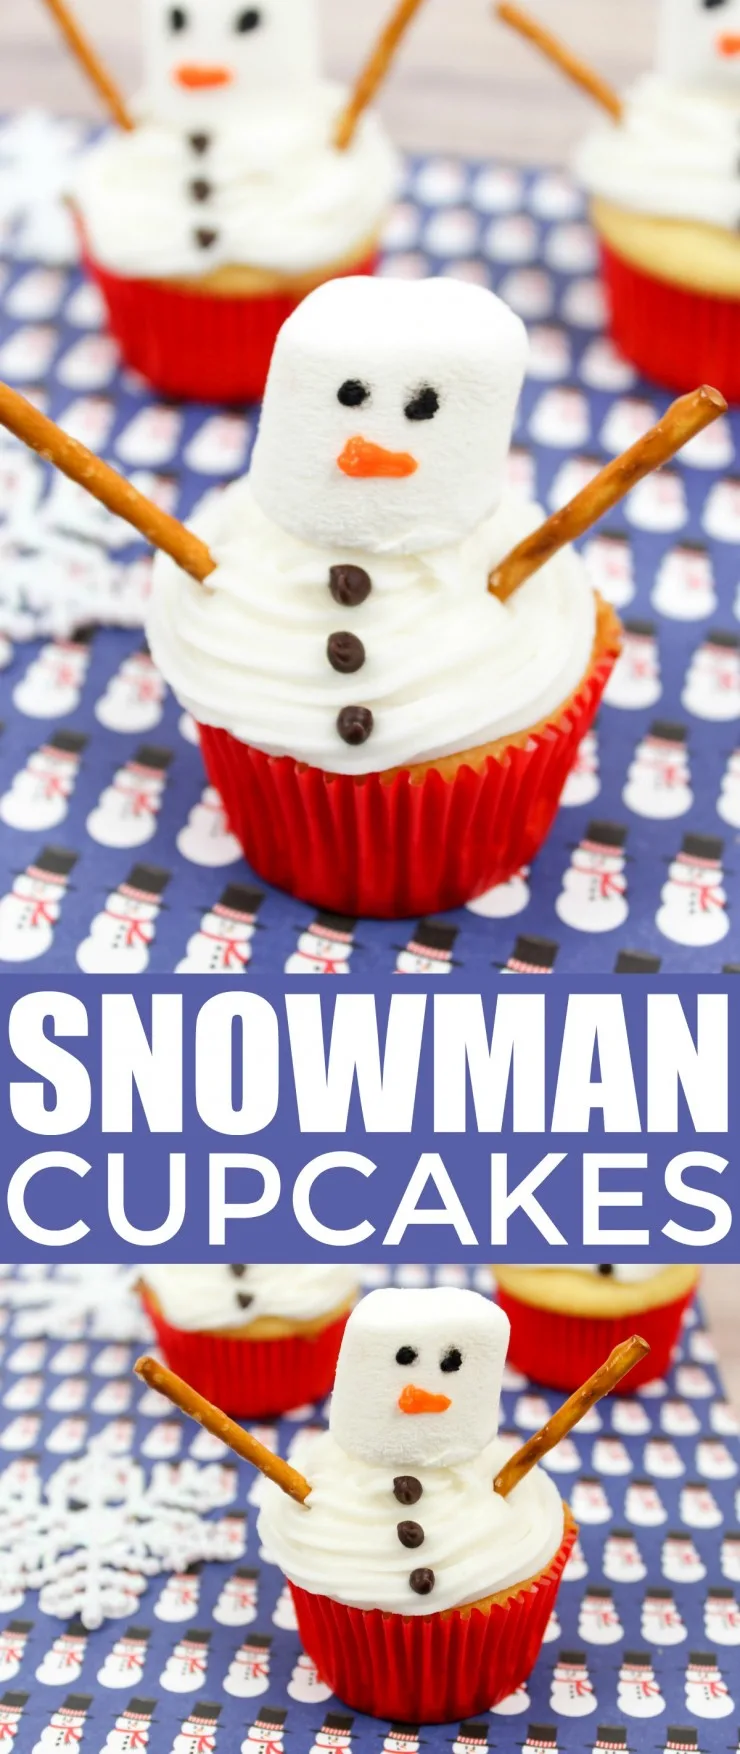 These snowman cupcakes are simple but festive and are perfect for class Christmas parties, holiday bake sales or an after dinner treat at any holiday dinner party.